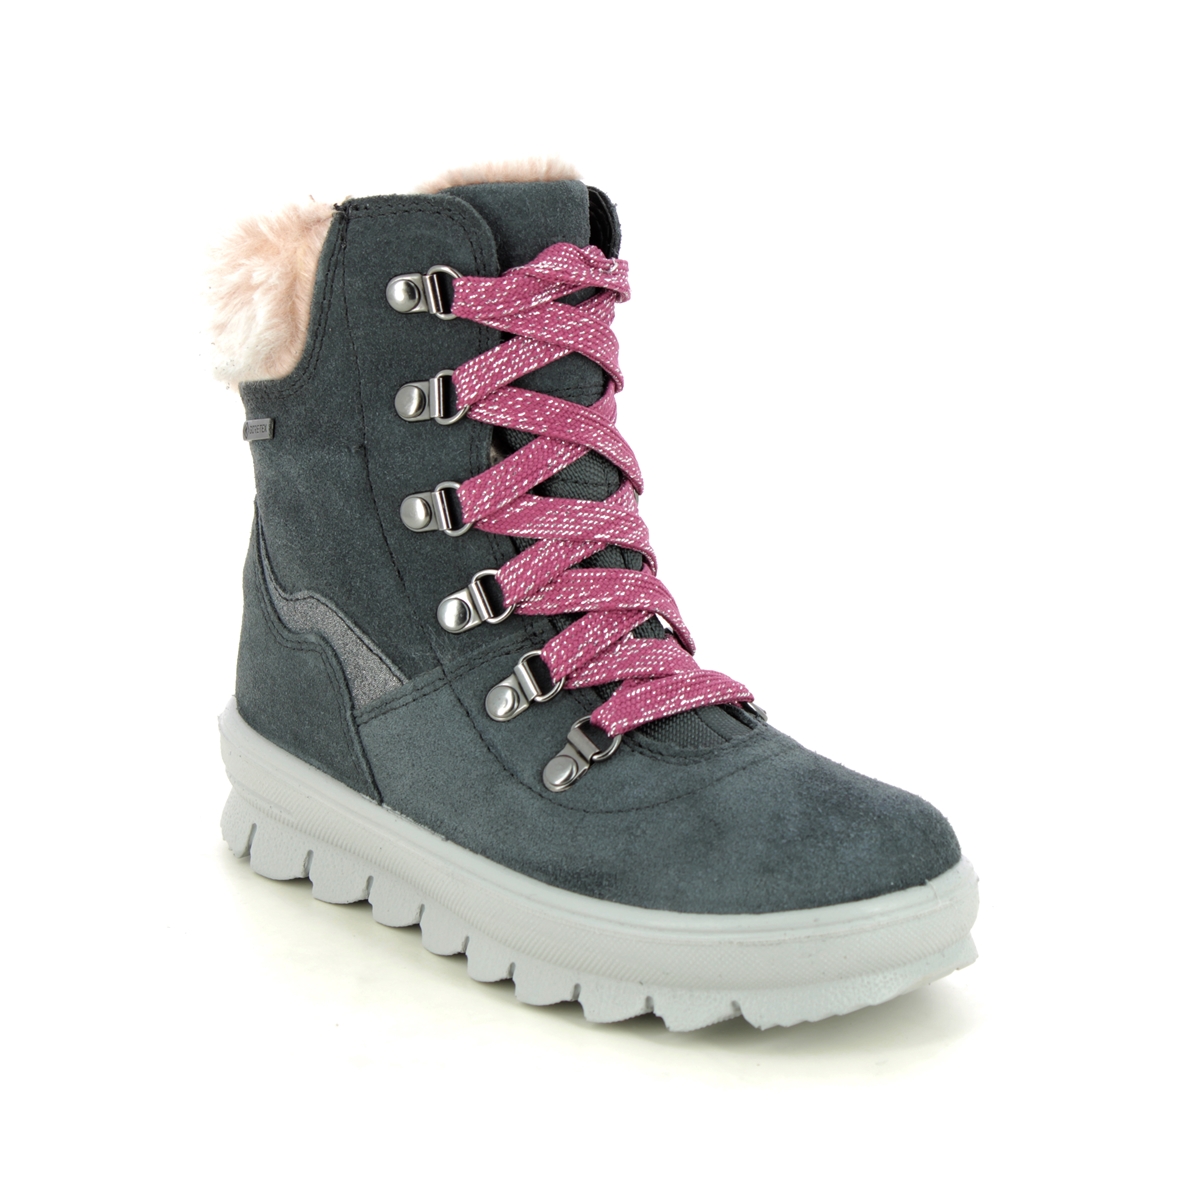 Superfit Flavia Lace Gtx Grey Suede Kids Girls Boots 1000220-2000 In Size 28 In Plain Grey Suede